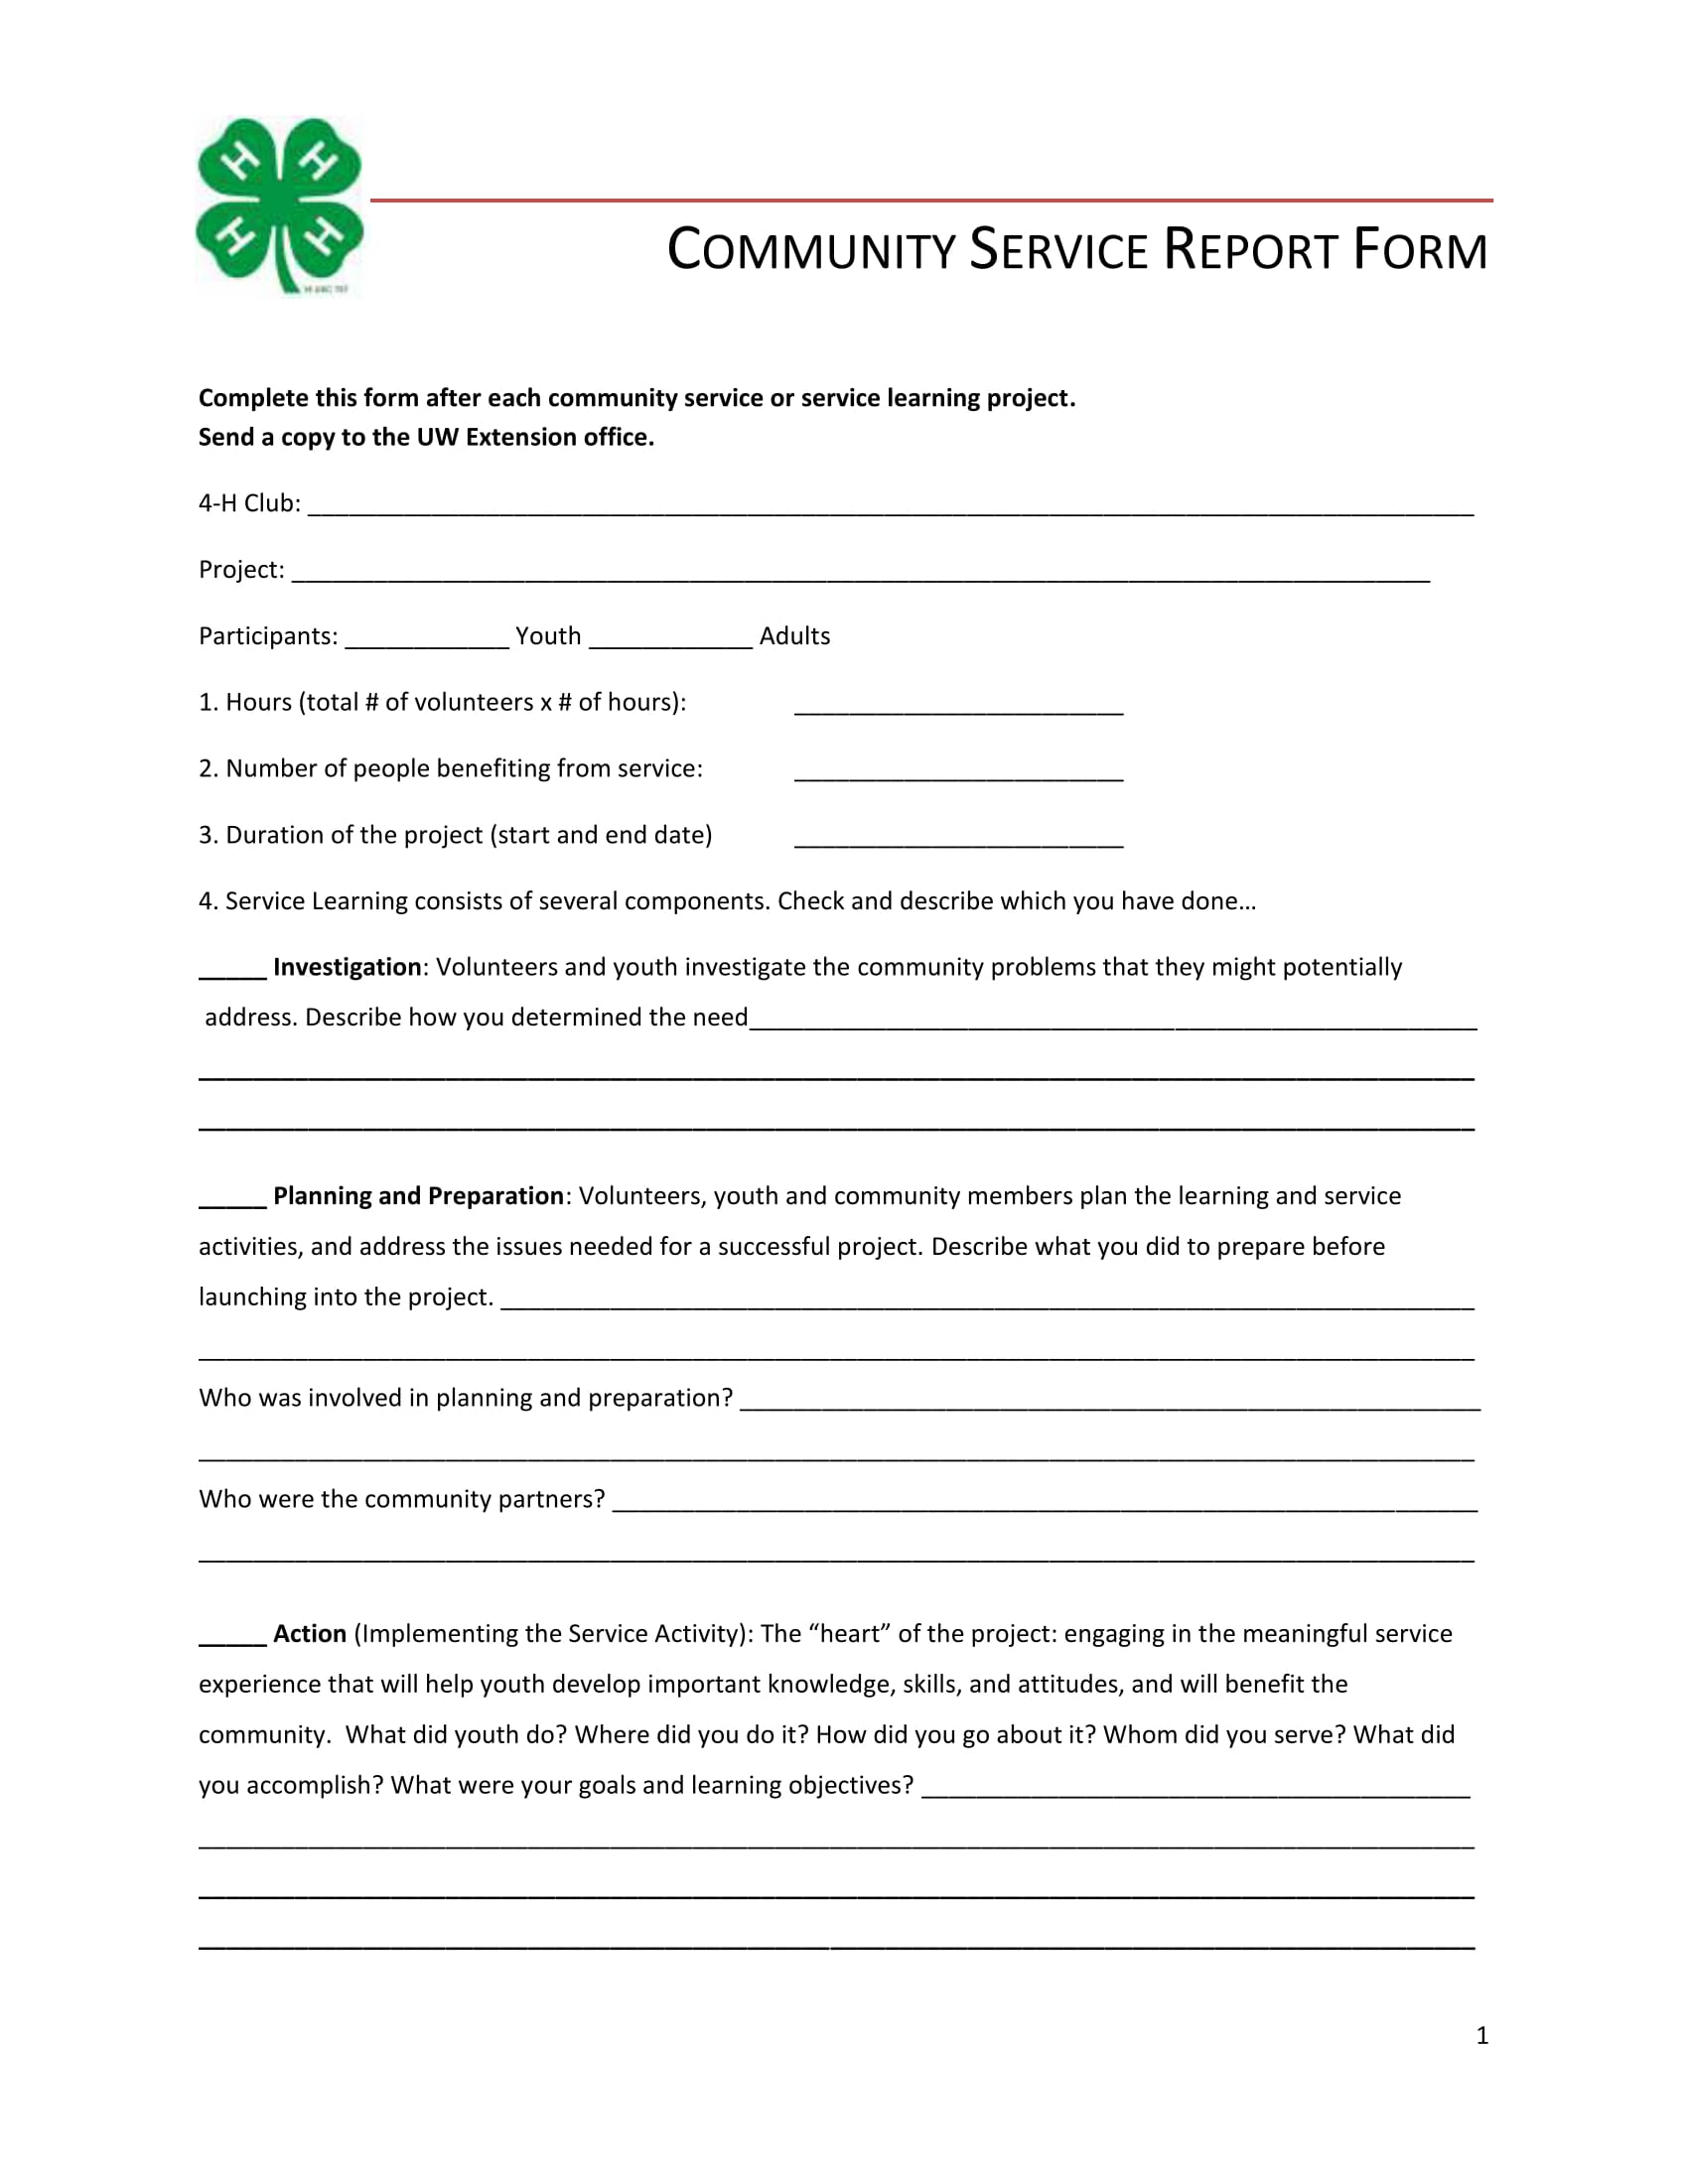 community project service report form 1